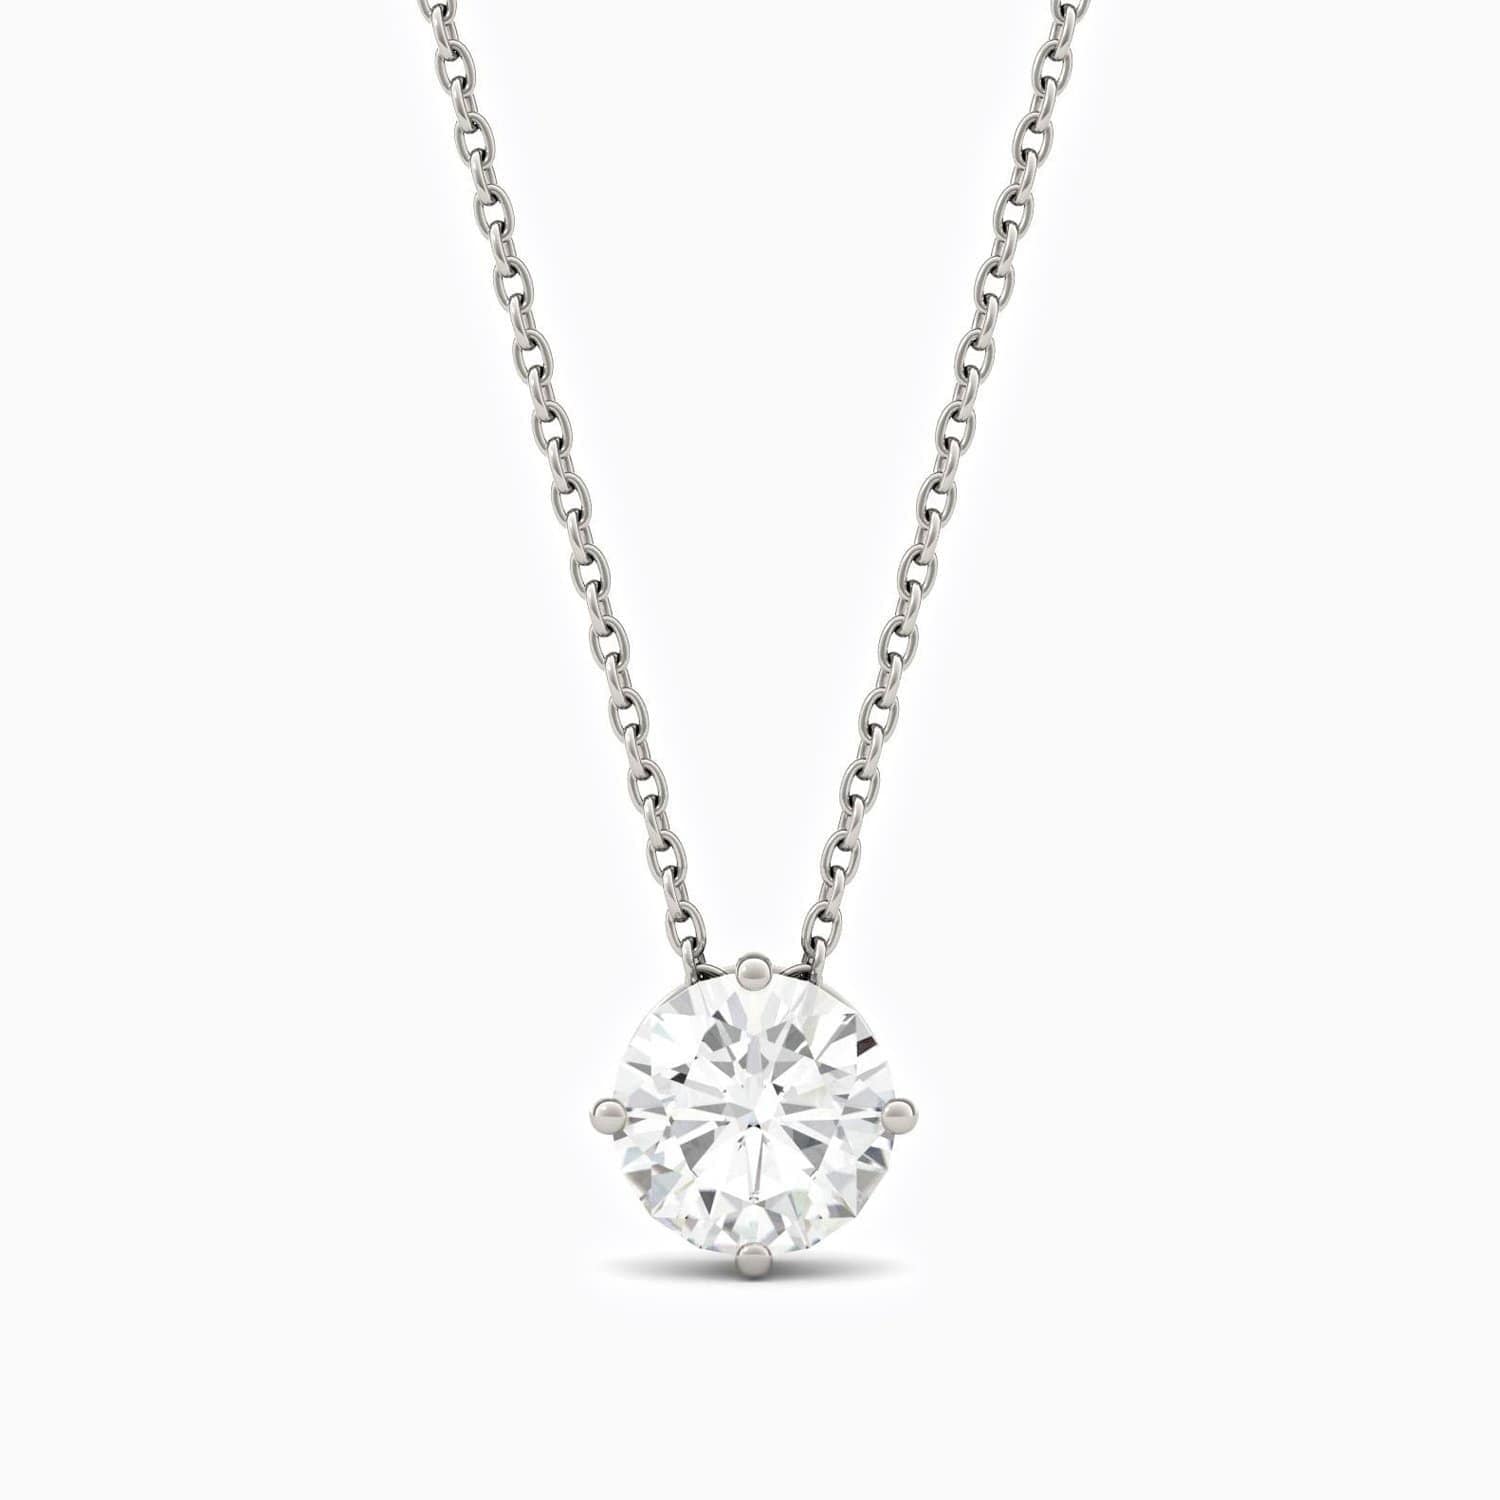 D Grade Moissanite Necklace With Four Prong Round Solitaire Pendant 1.04 Carat